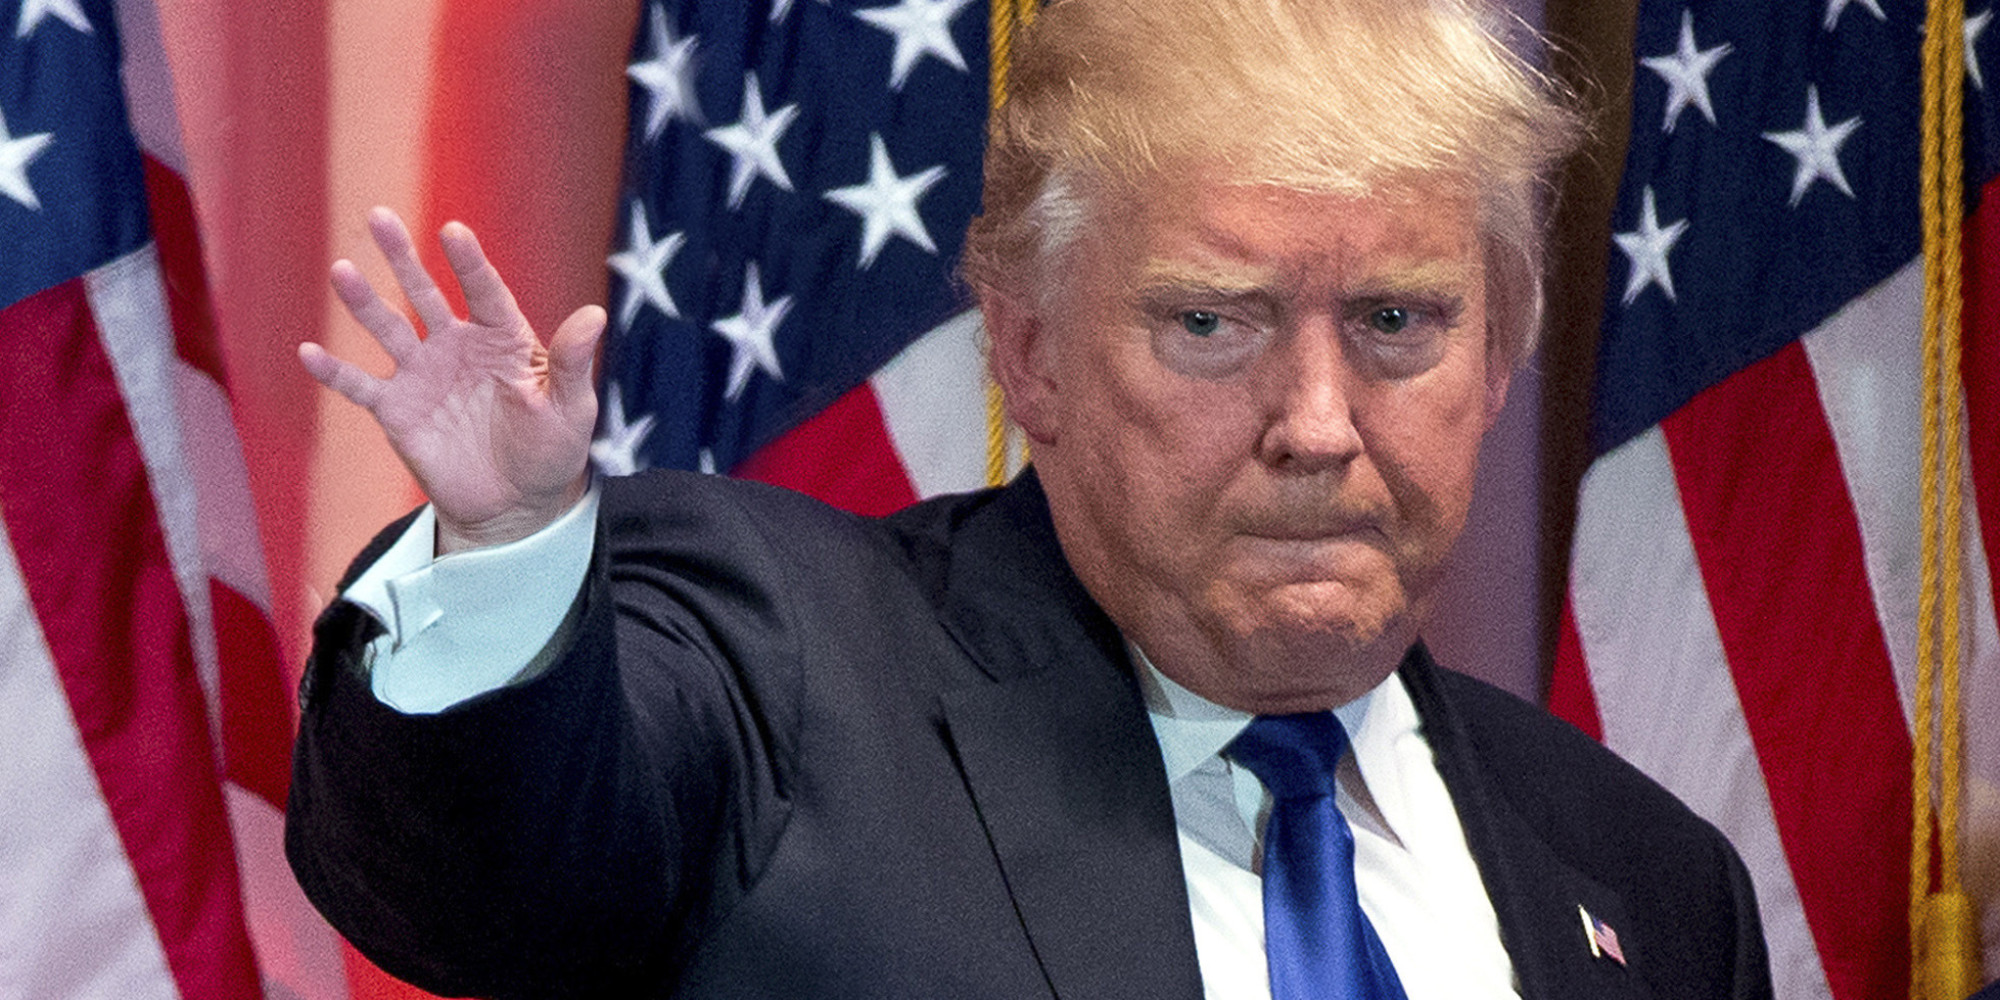 It's Official: Donald Trump Has Very Small Hands | HuffPost UK